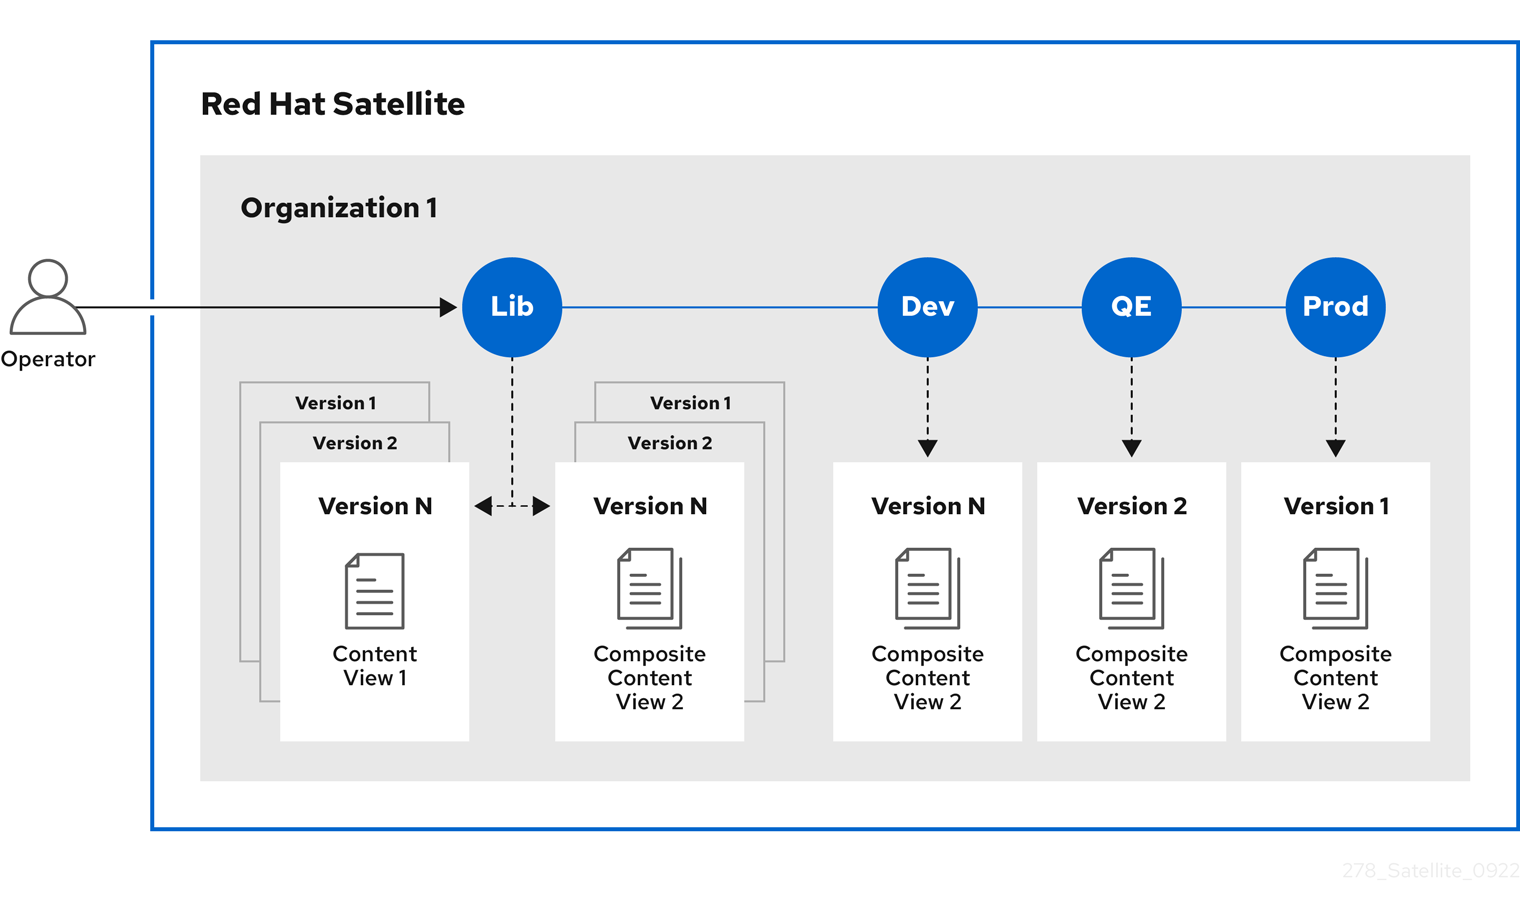 The Satellite Application Lifecycle